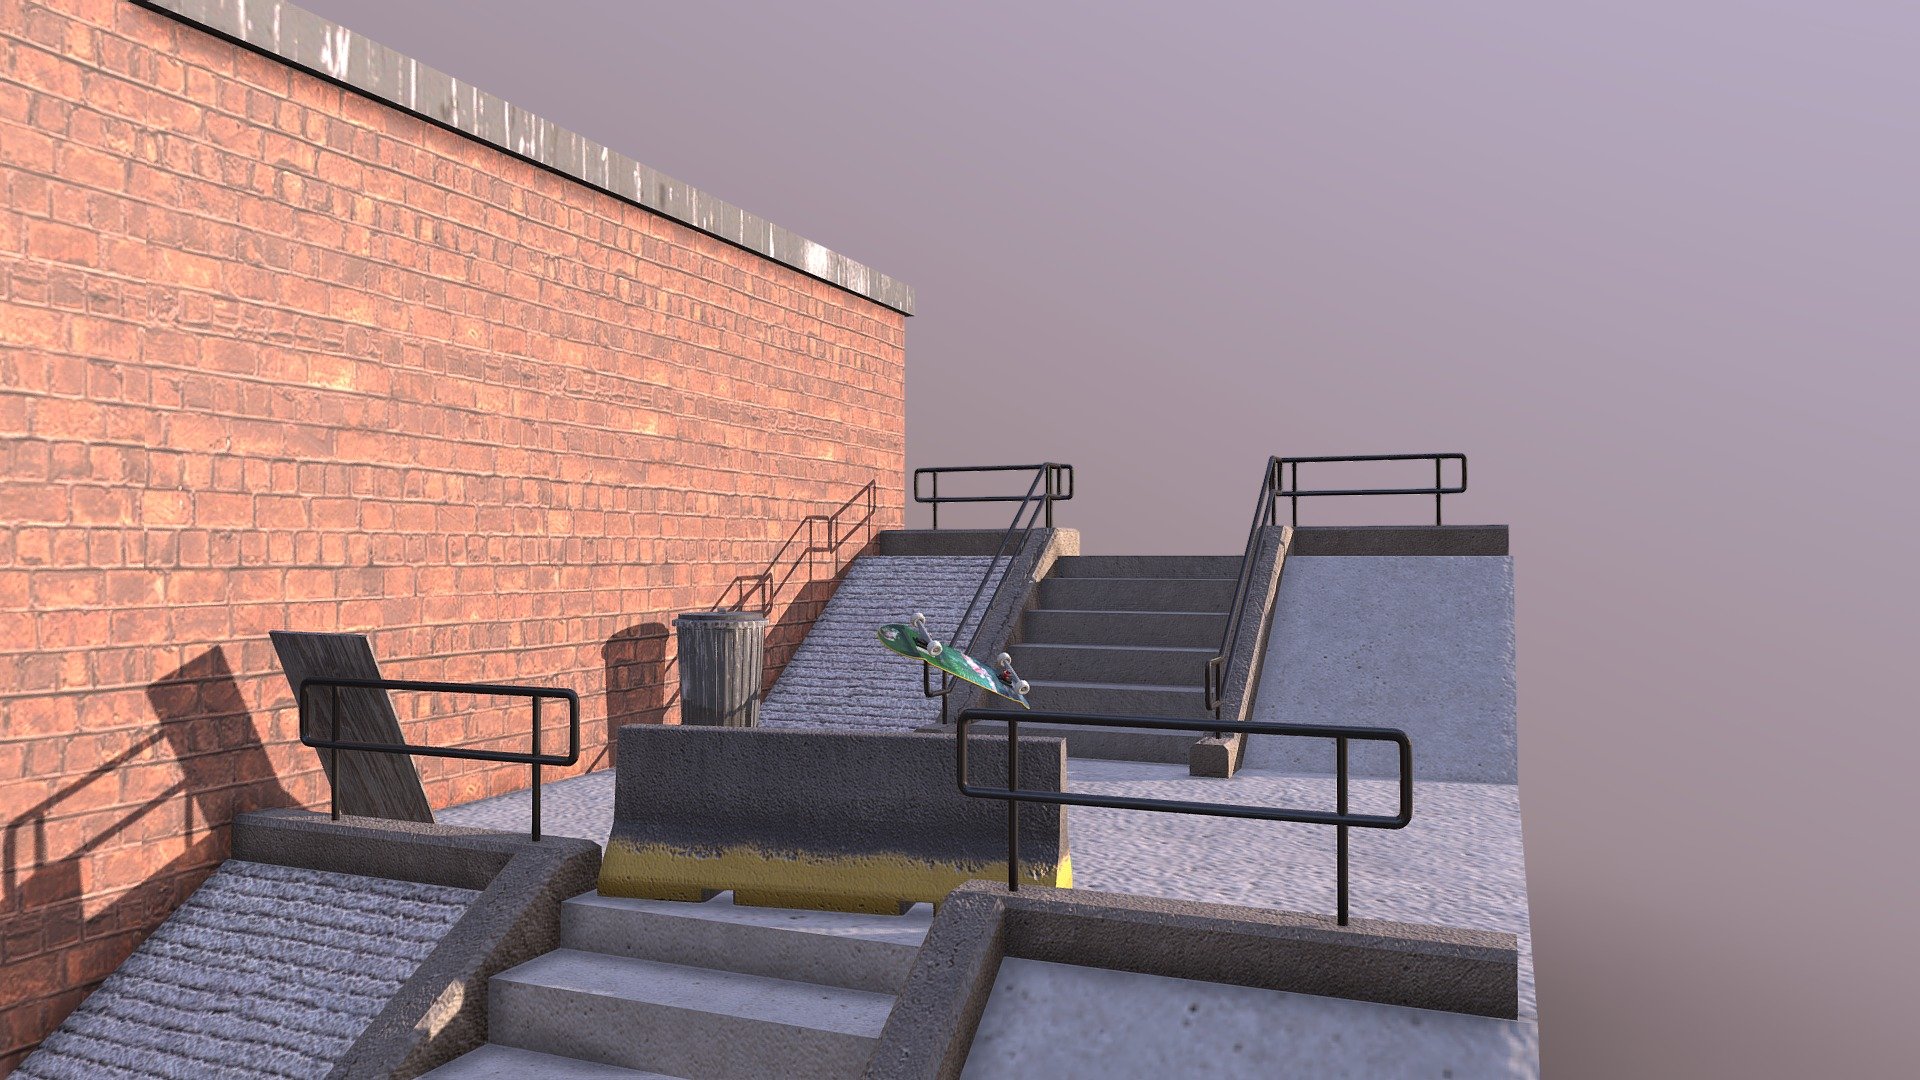 Ct4012 - 2019 submission. I based this model around a real life location  in New York. My interpretation of hidden treasure is the whole scene itself. Skate spots, as they are called are a real treasure for a skater because they are hard to find amongst the countless number of stairs and rails in any city 3d model